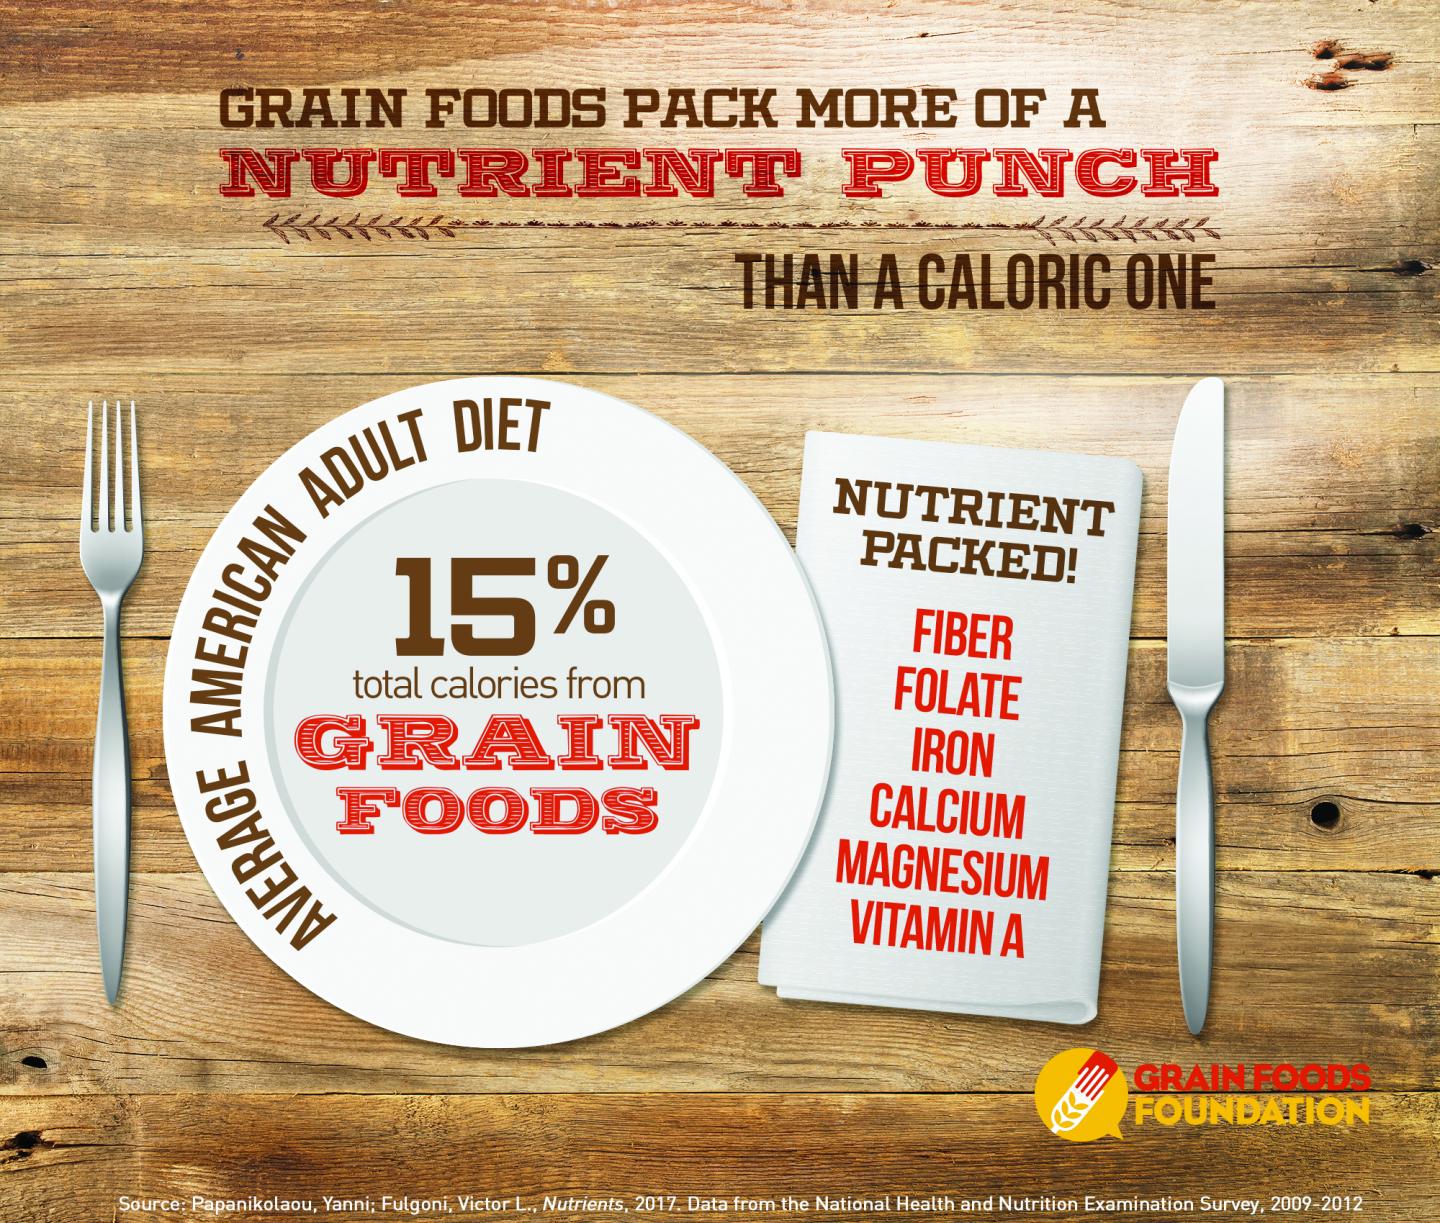 Grain Foods Pack More of a Nutrient Punch than a Caloric One